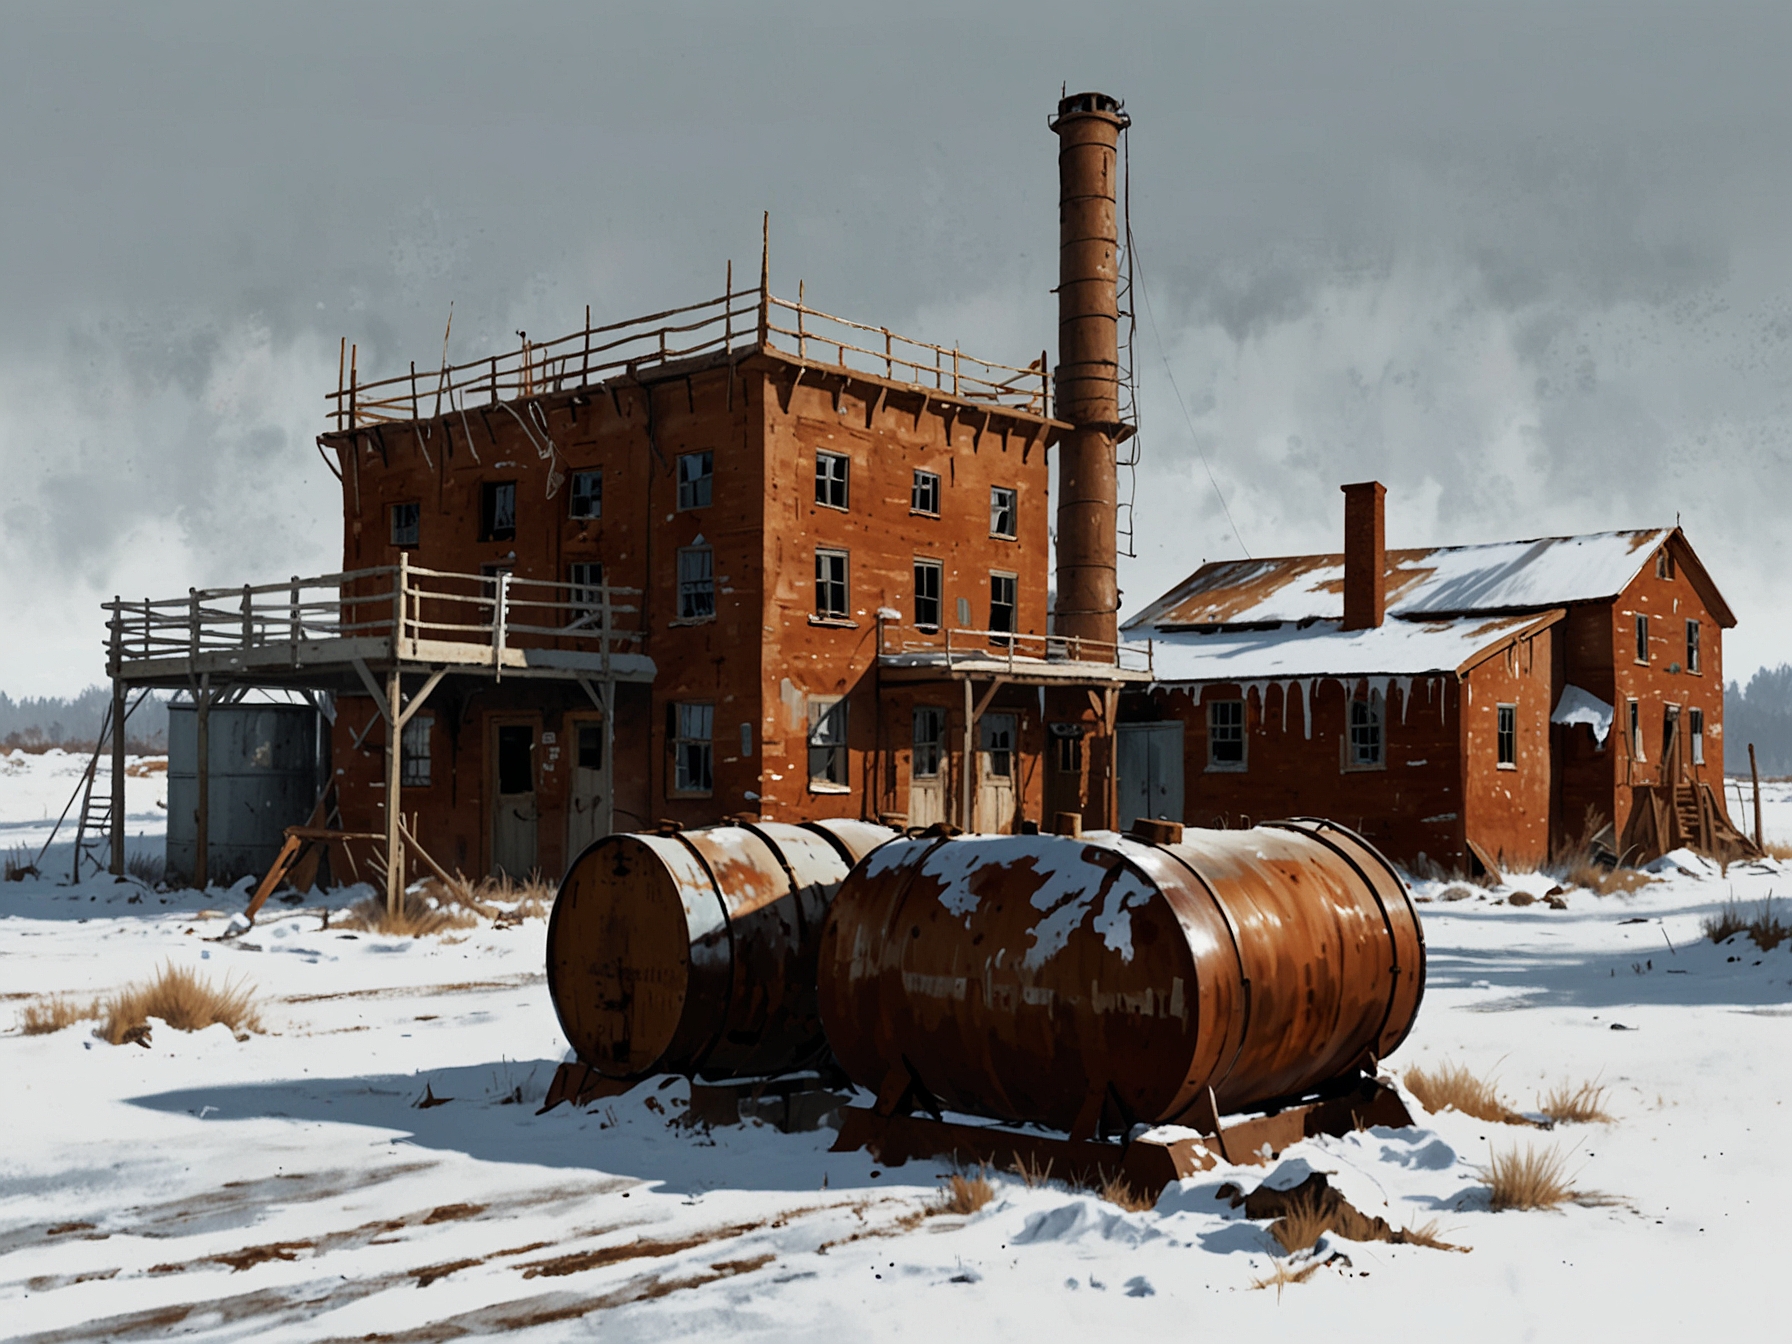 Image of Wilkes Station showing rusted fuel drums and decrepit buildings covered in ice and snow, highlighting the abandoned state and environmental peril.